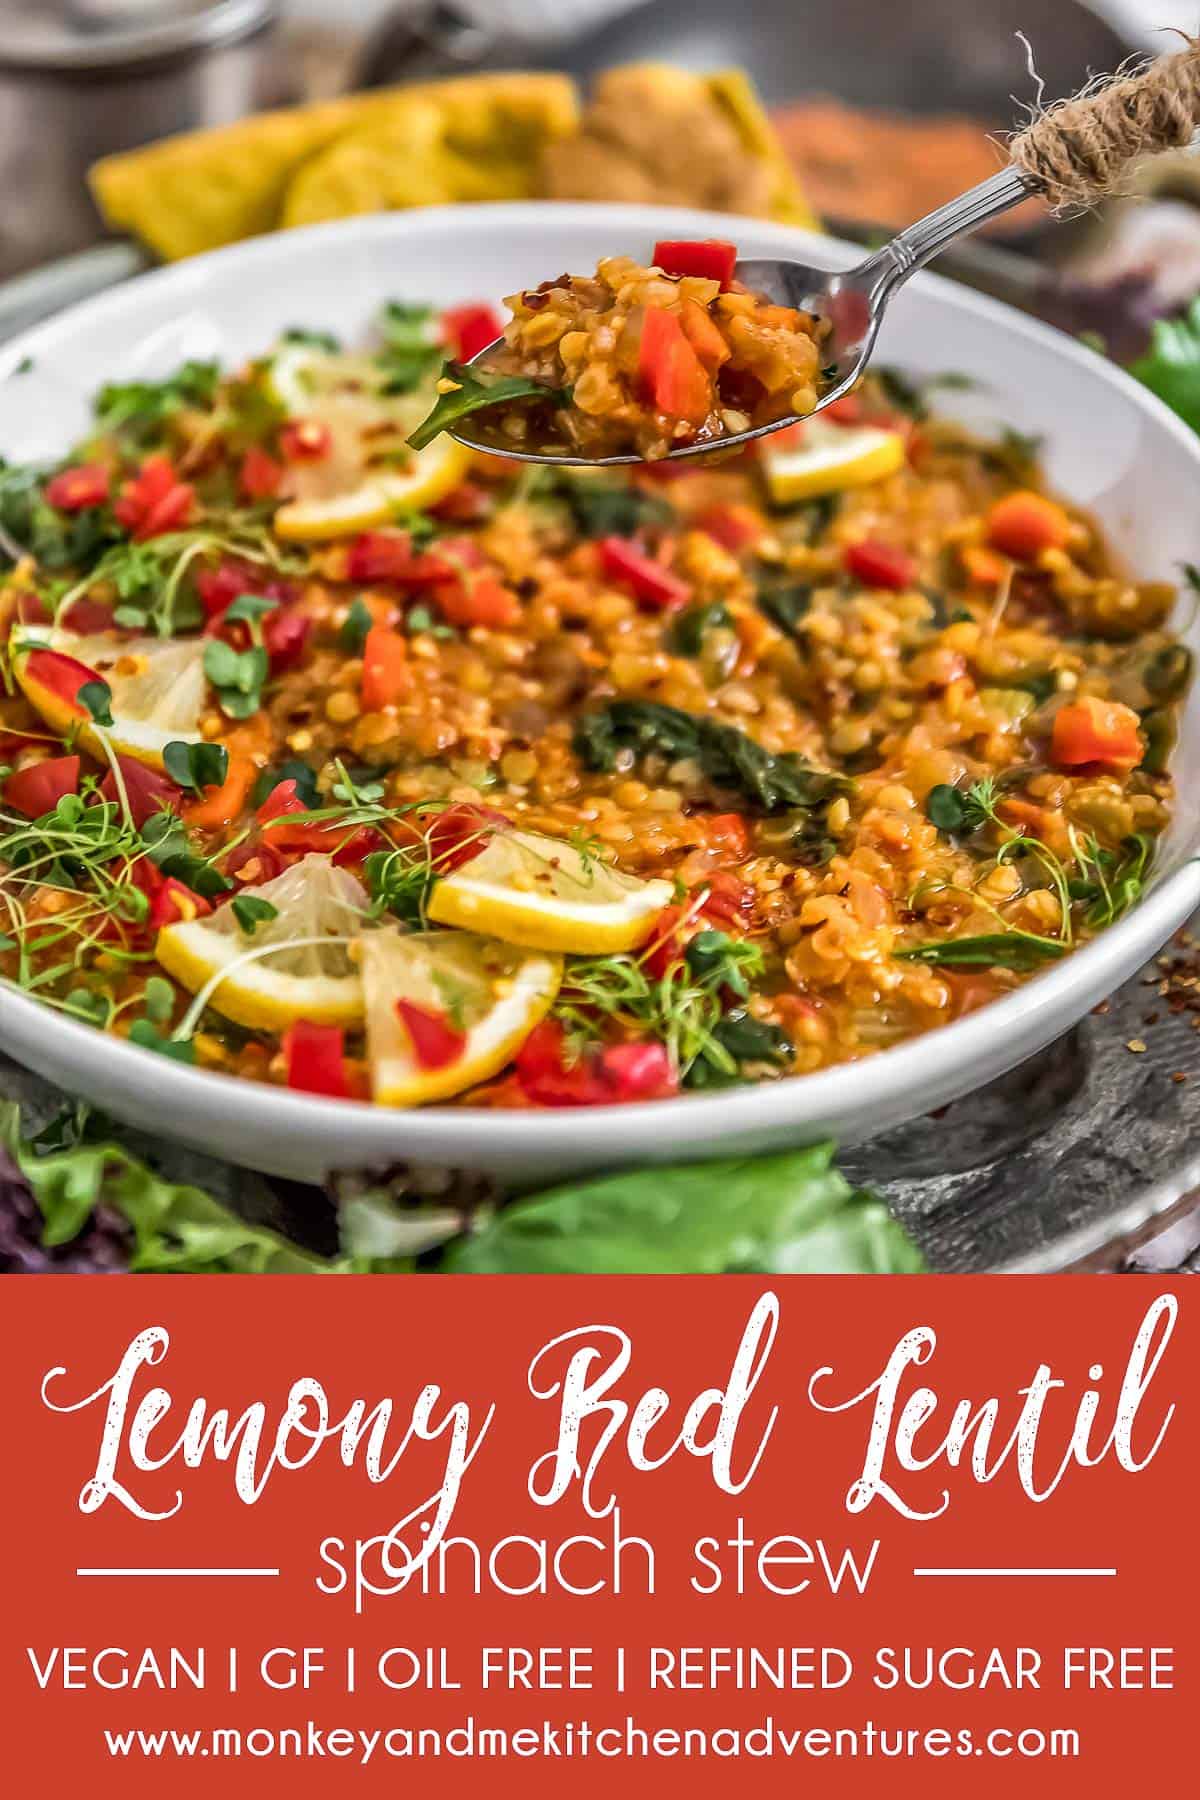 Lemony Red Lentil Spinach Stew with text description